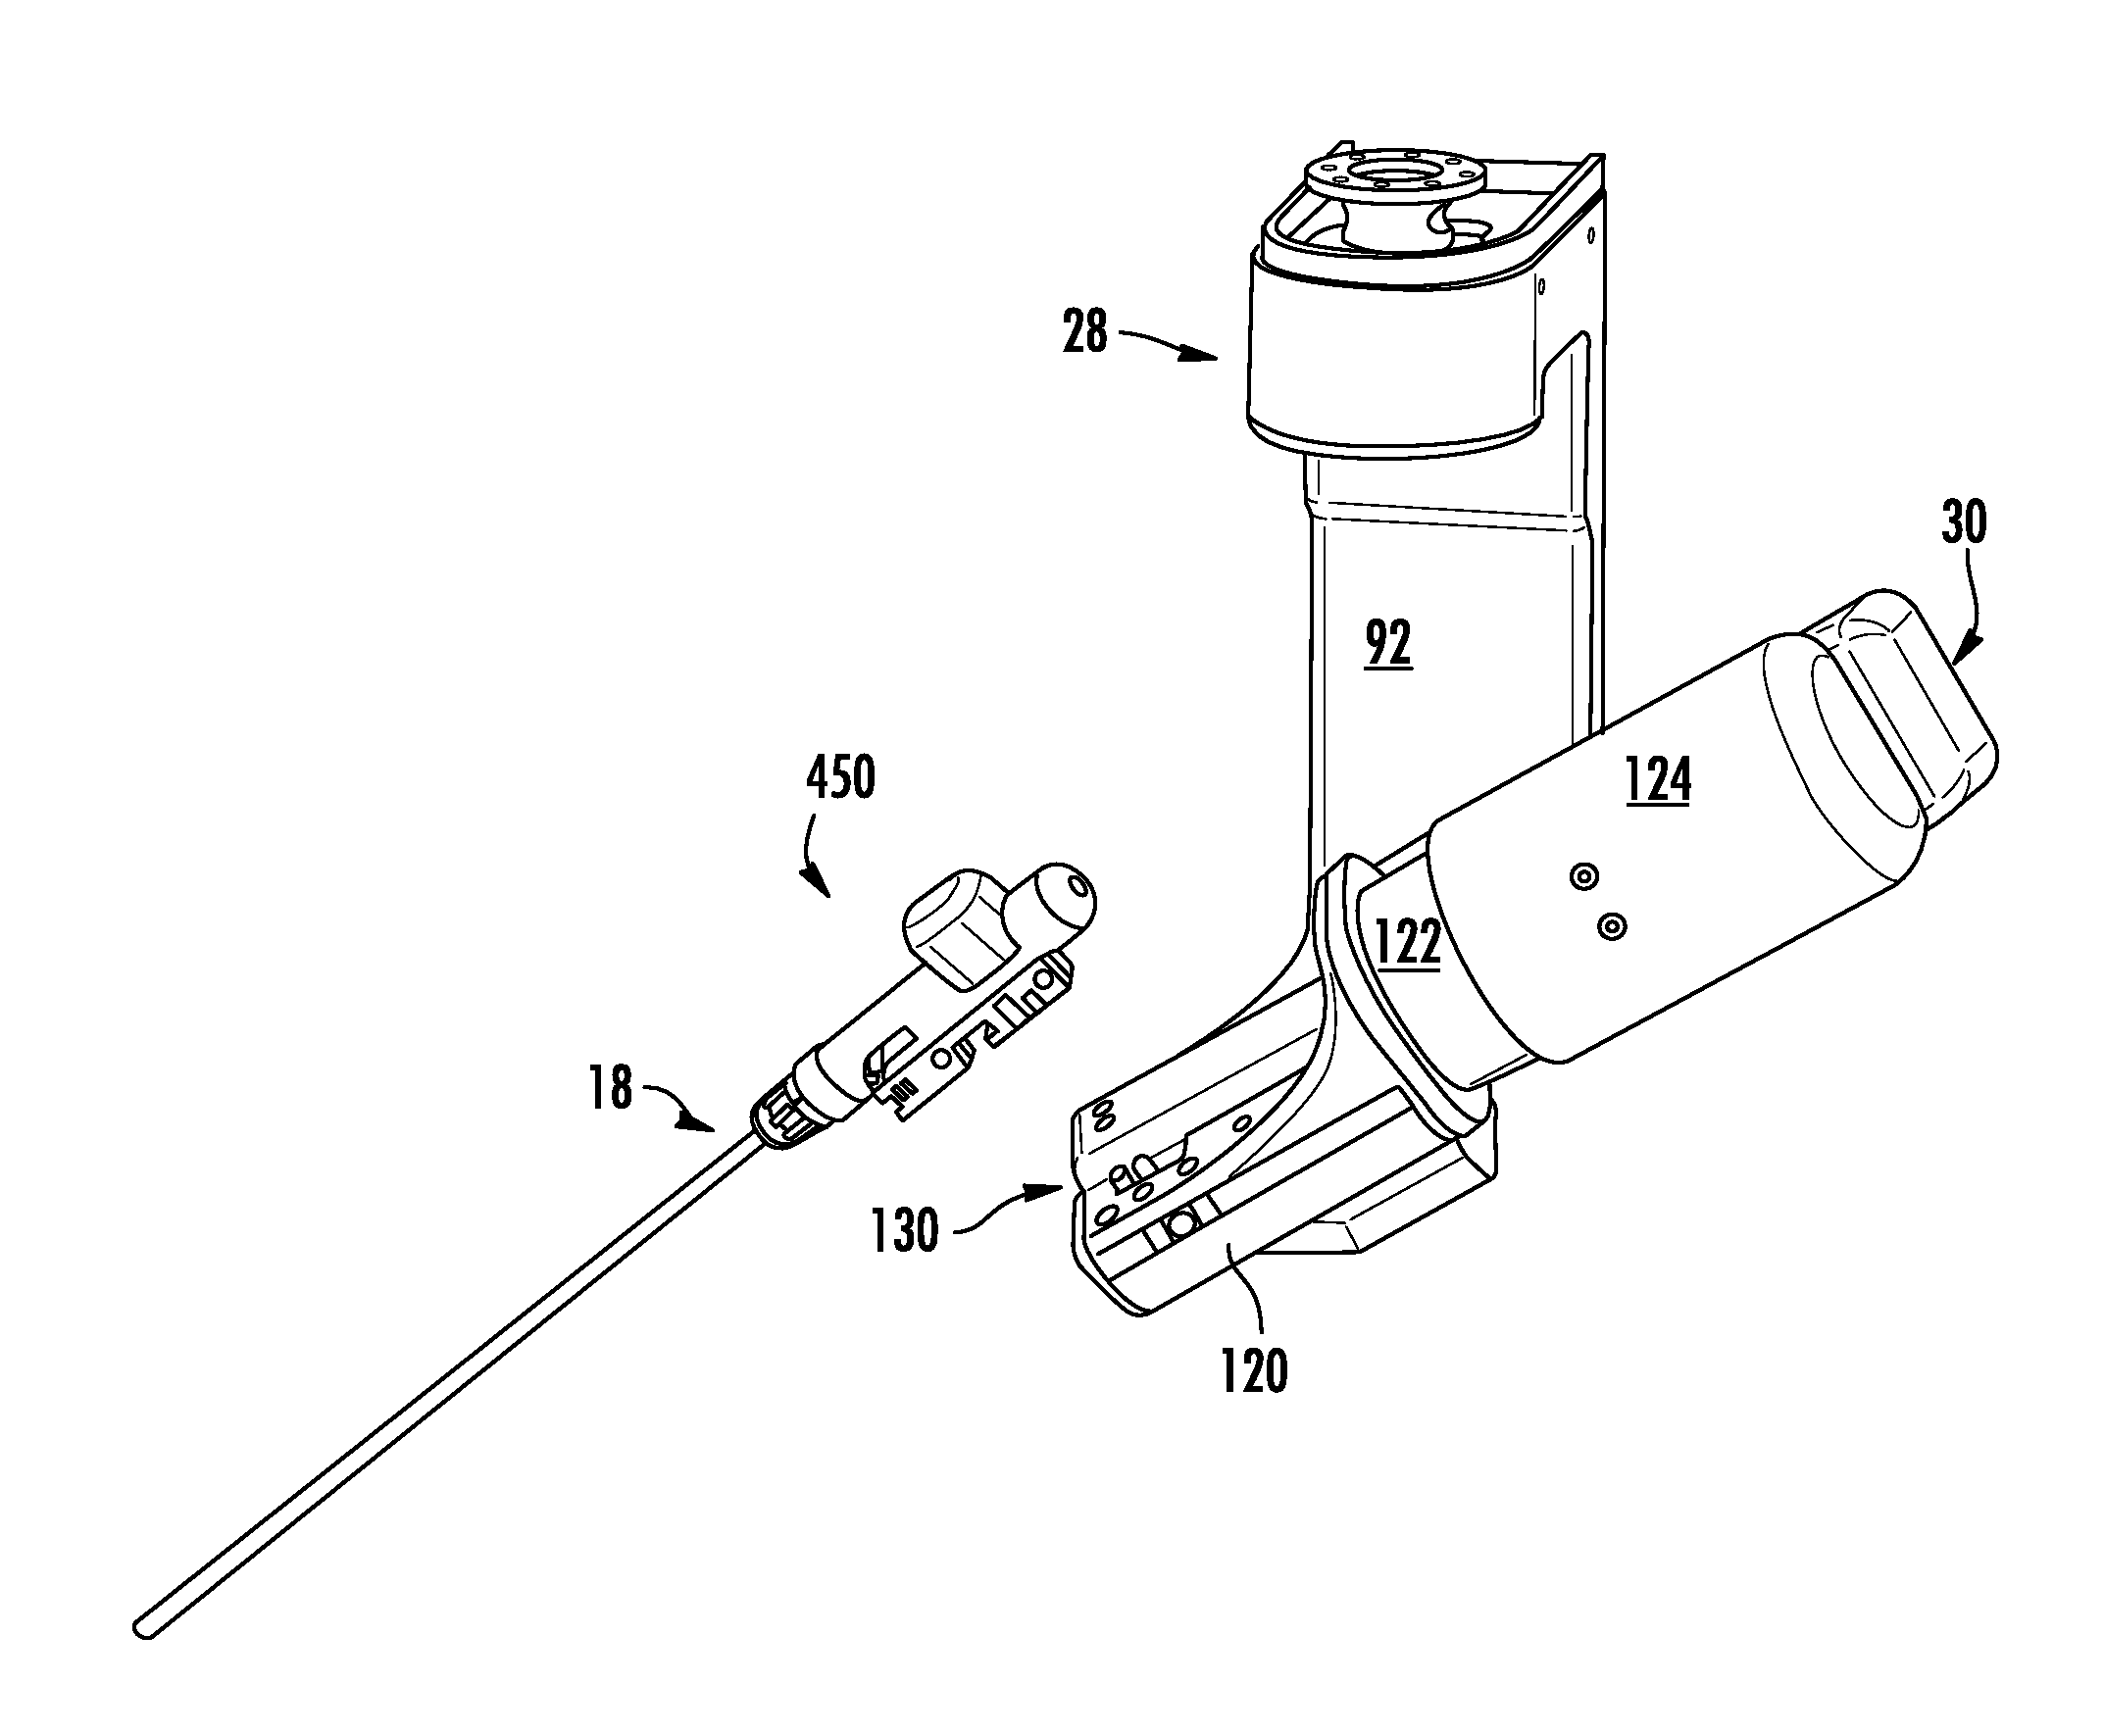 Robotic surgical system for performing minimally invasive medical procedures